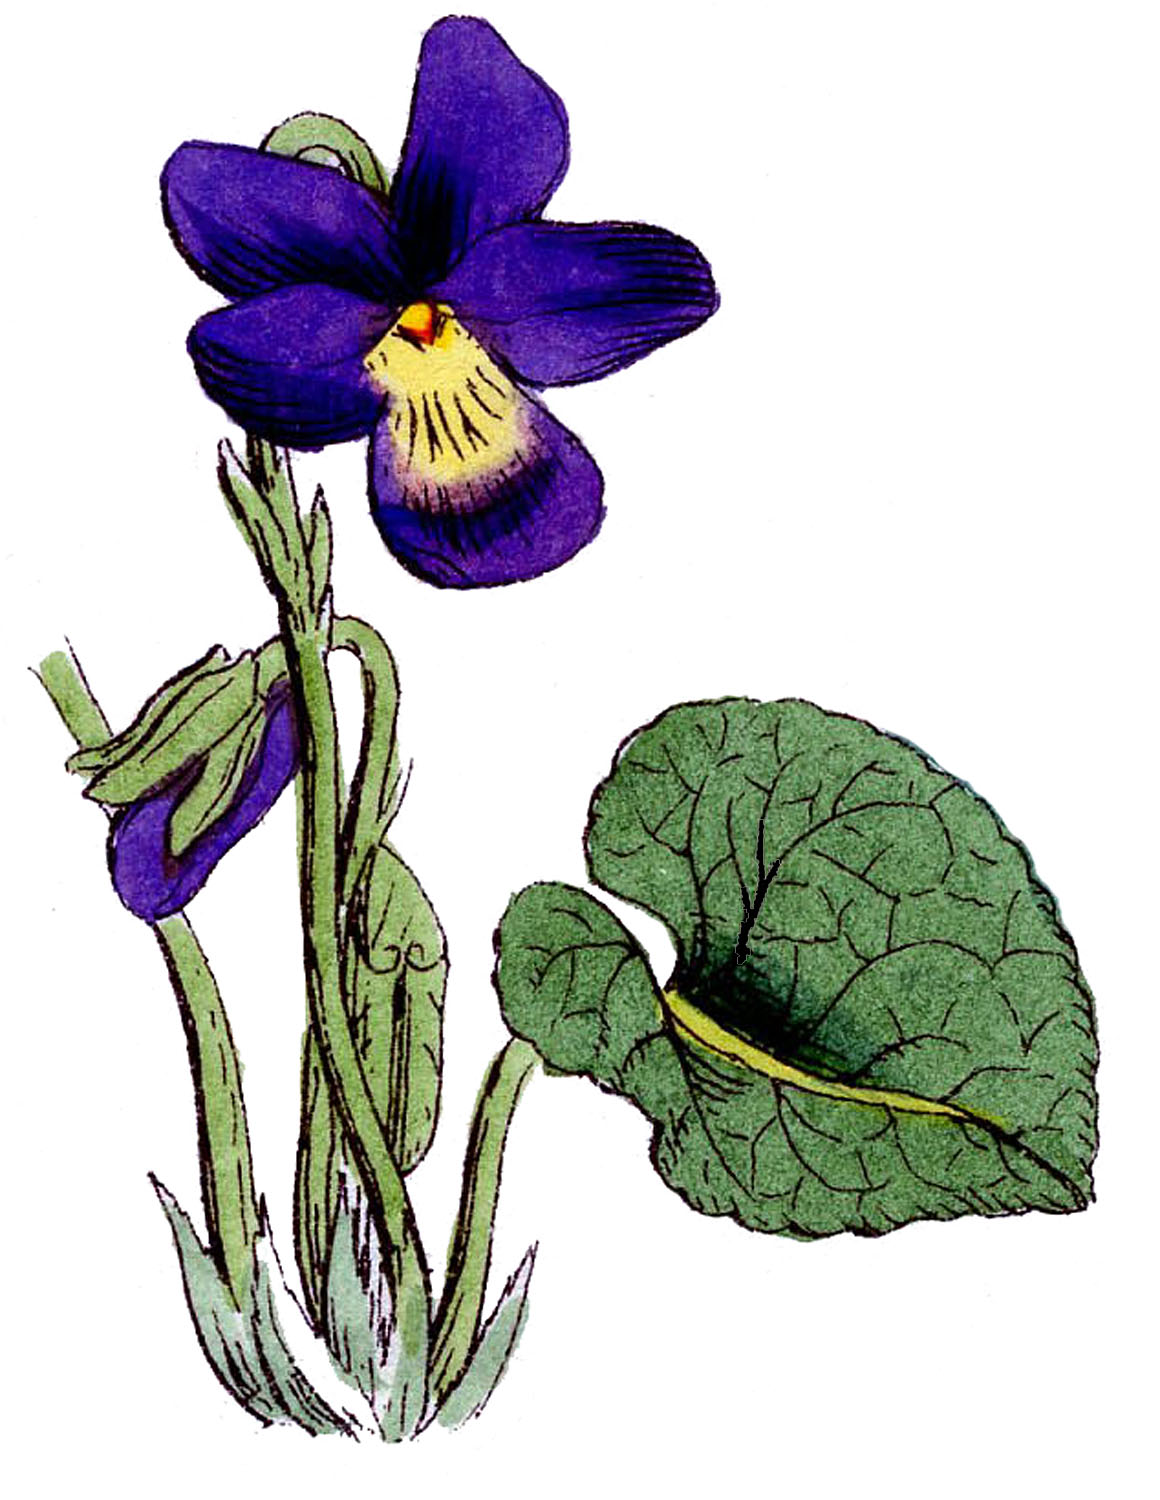 Vintage Floral Images - 3 Lovely Violets - The Graphics Fairy